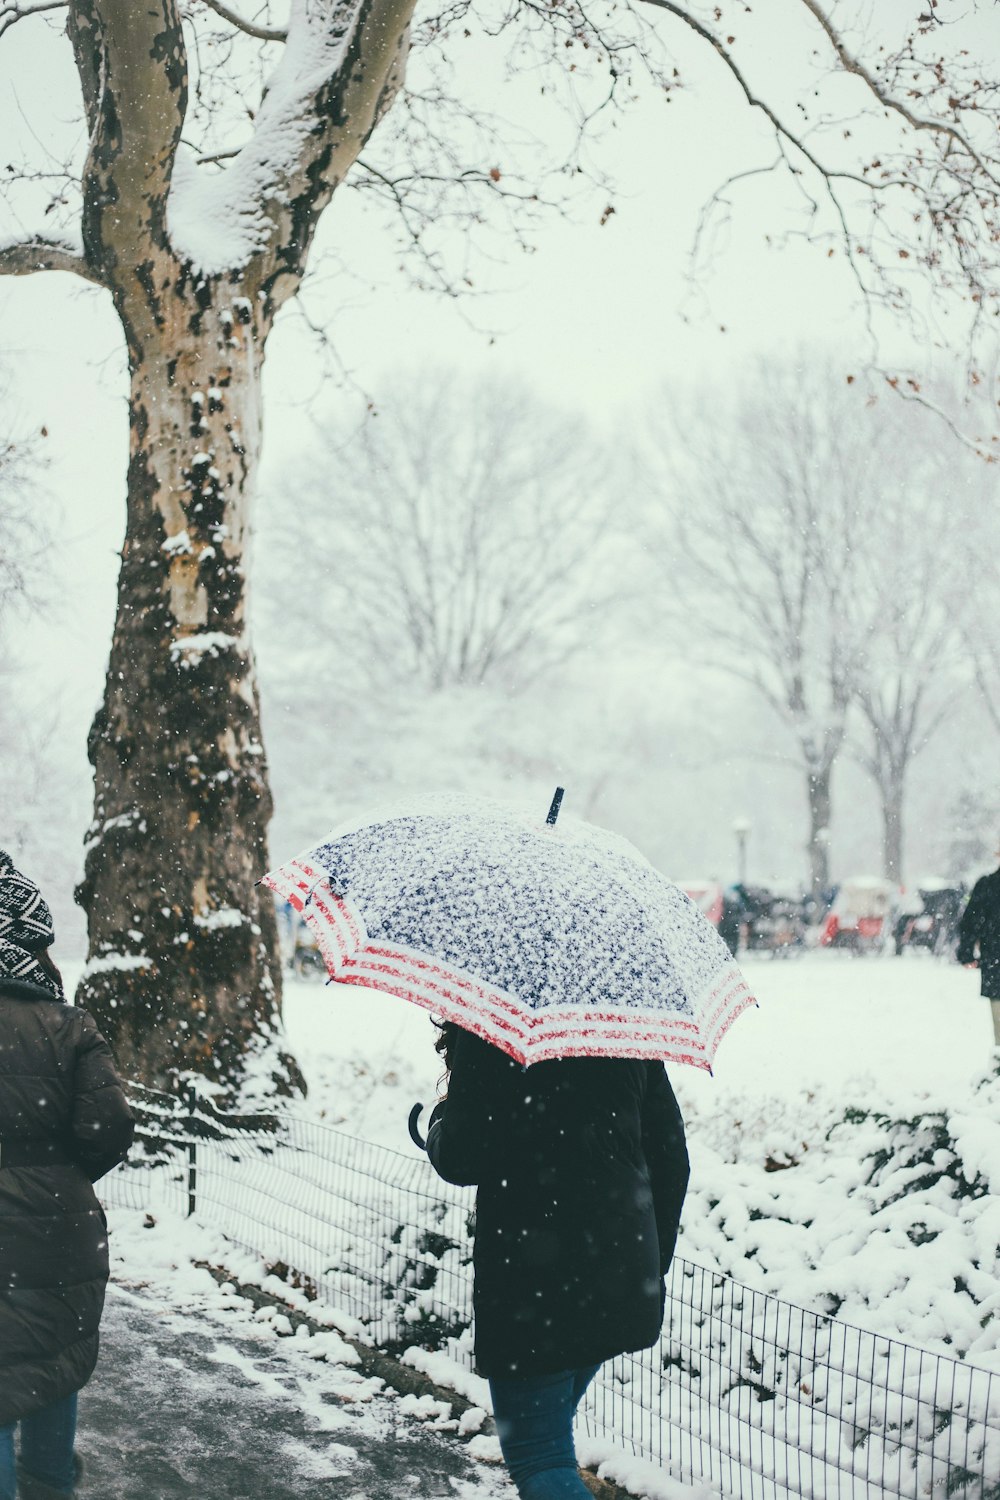 person walking while holding umbrella during snowy weather